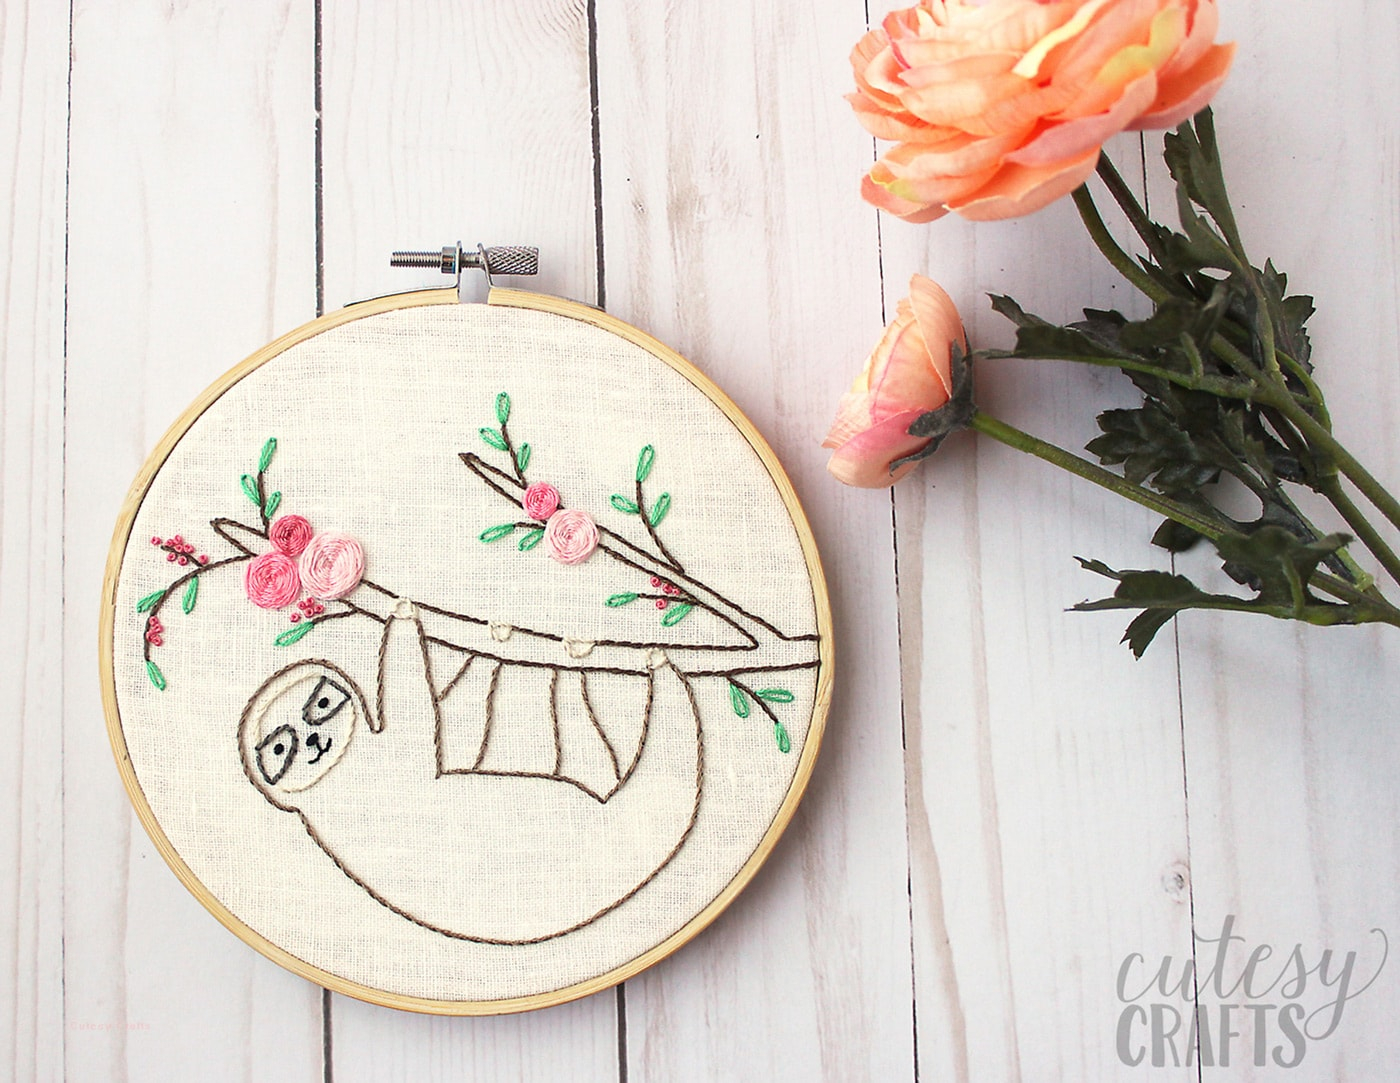 Adorable Sloth Hand Embroidery Pattern The Polka Dot Chair